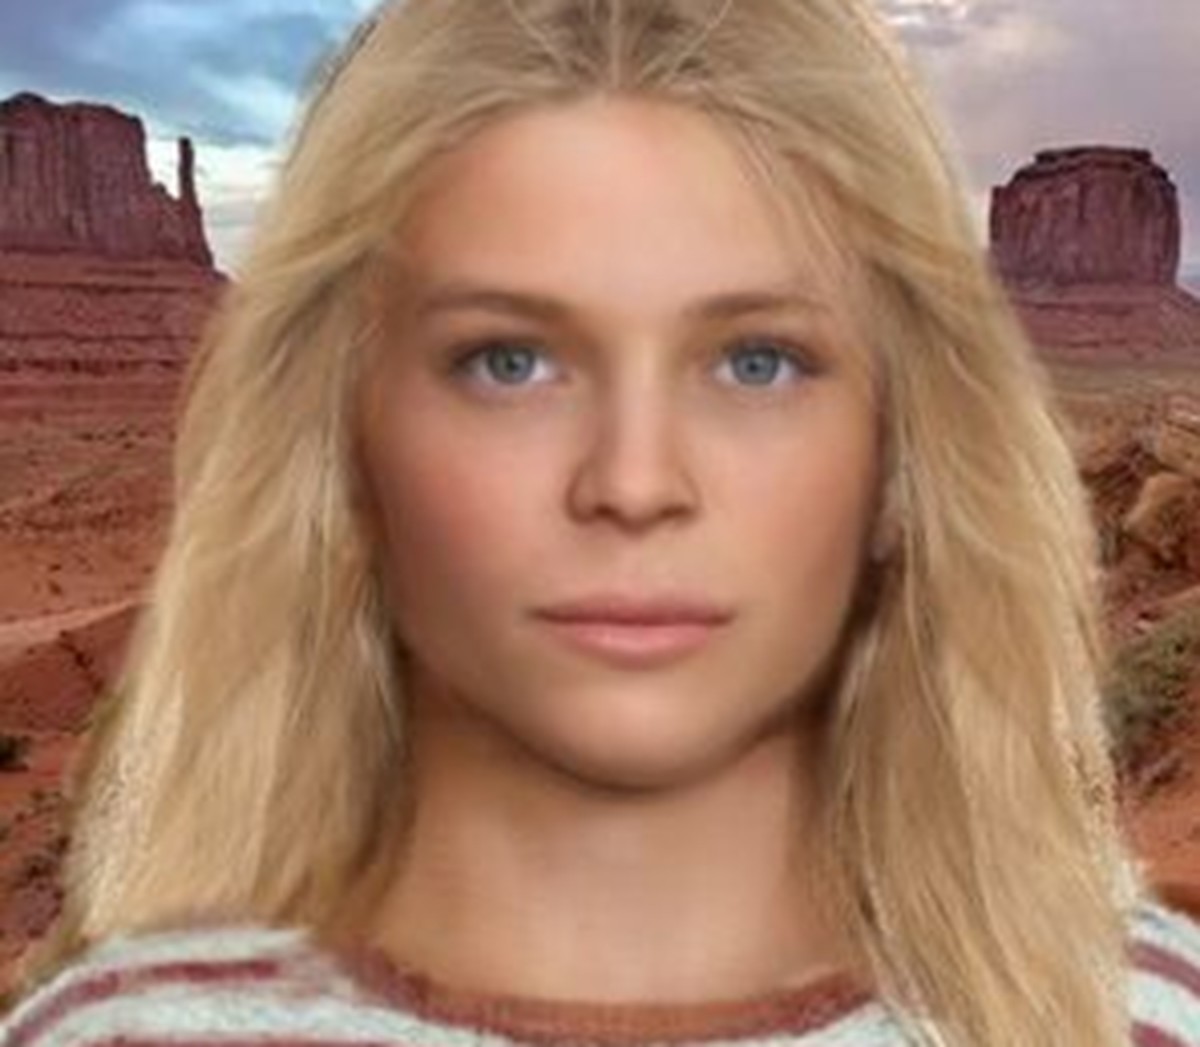 Valentine Sally is an unidentified young woman found in Arizona on Valentine’s Day 1982. Photo courtesy of Find a Grave.